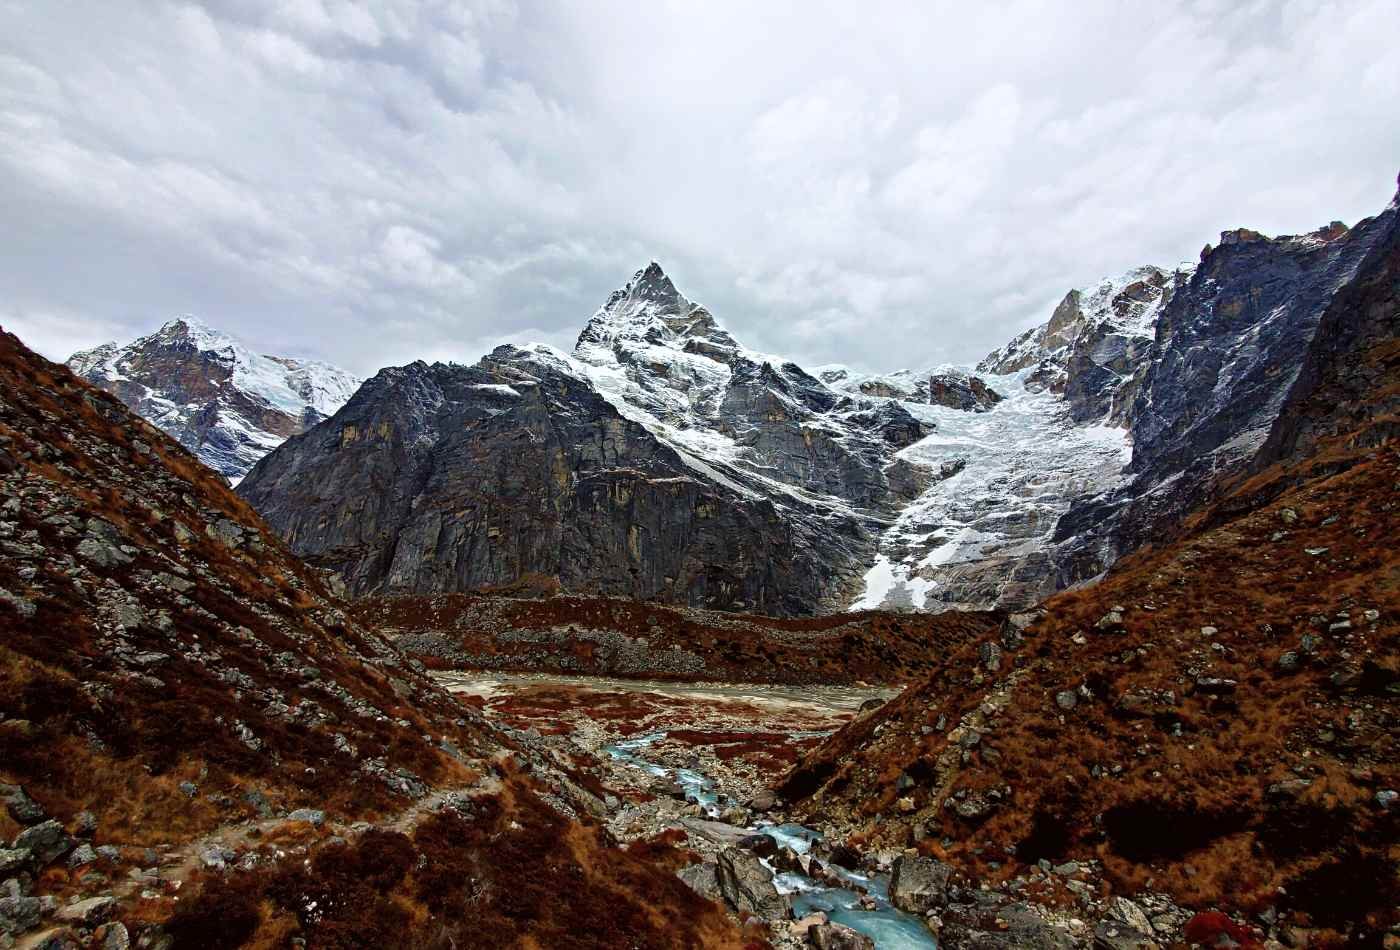 A beautiful view of Kyashar peak, with the majestic mountain towering in the foreground, and a small stream flowing in the surface.